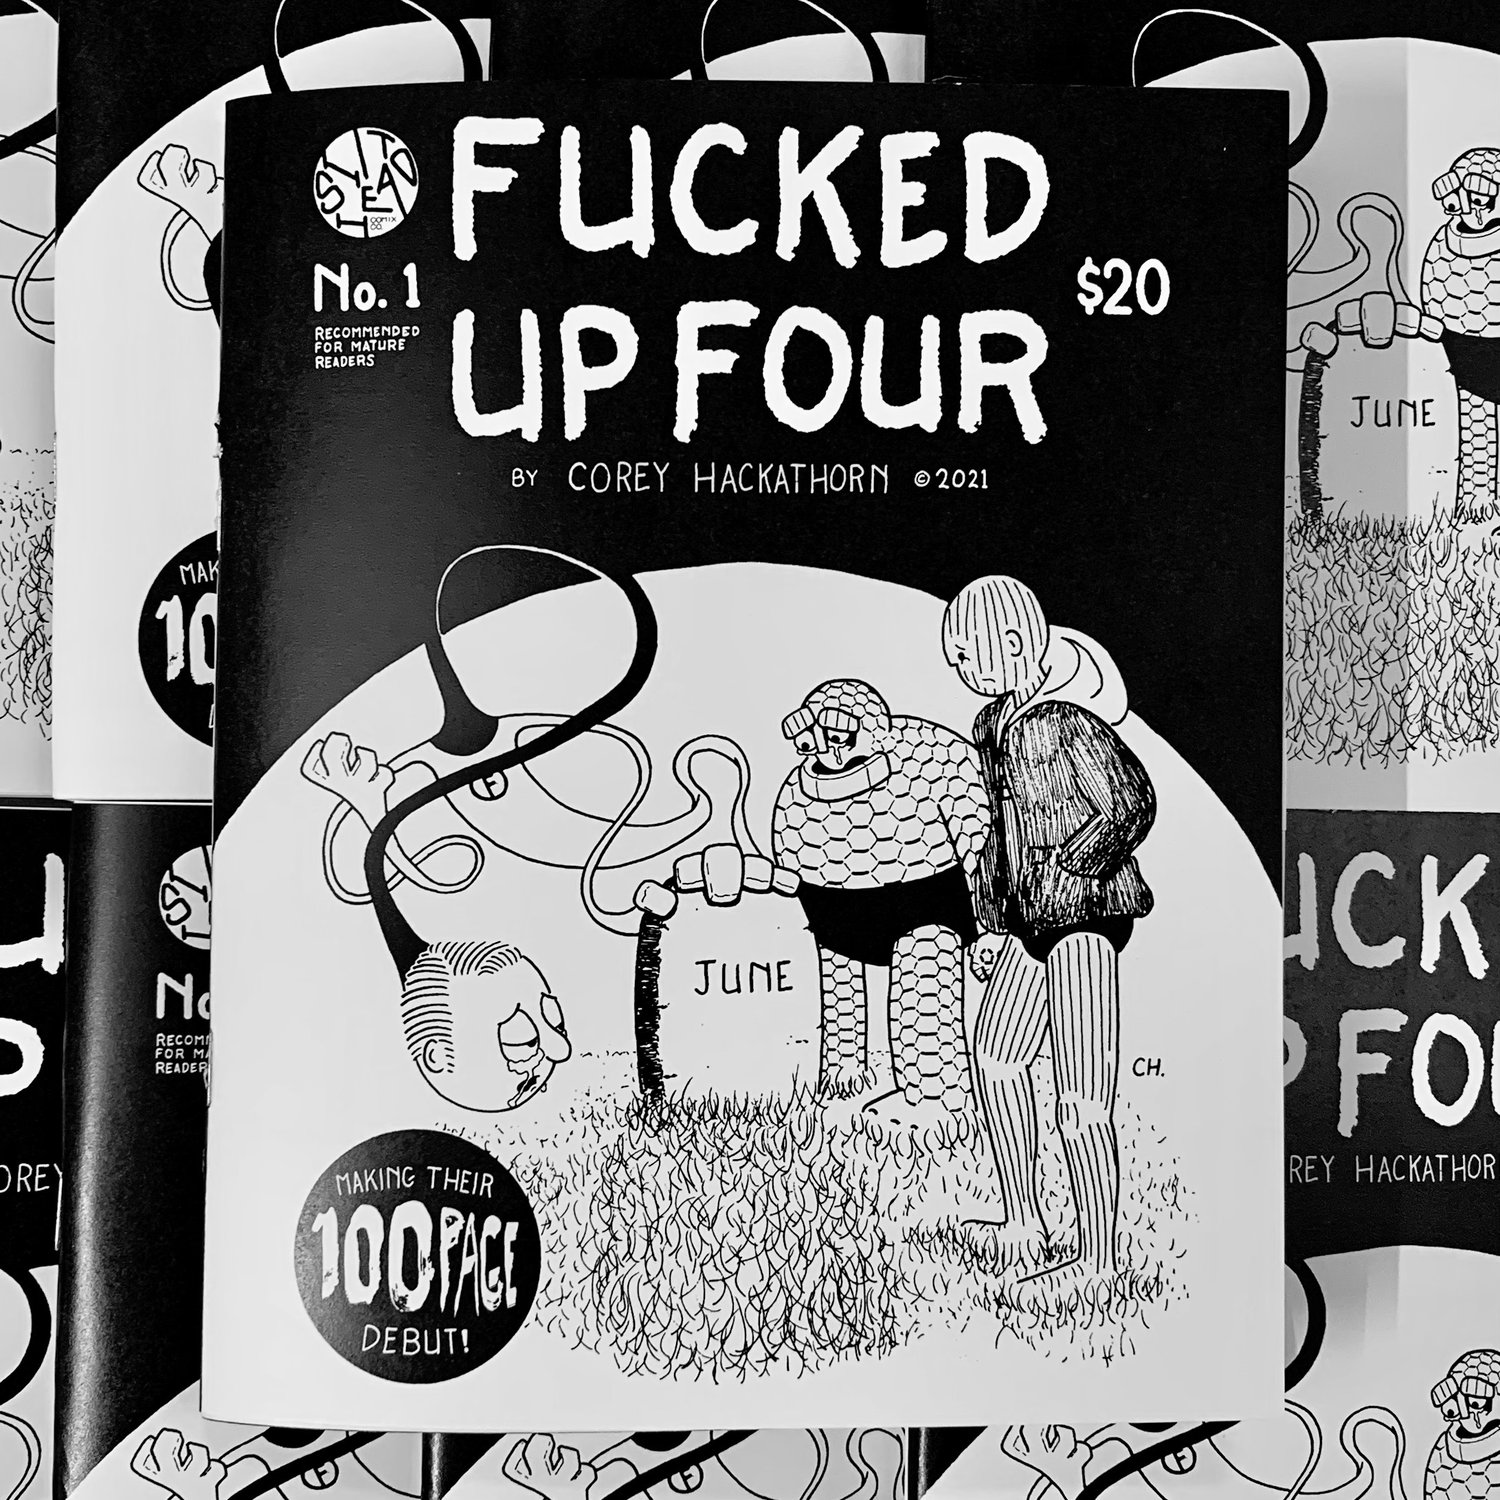 FUCKED UP FOUR No. 1